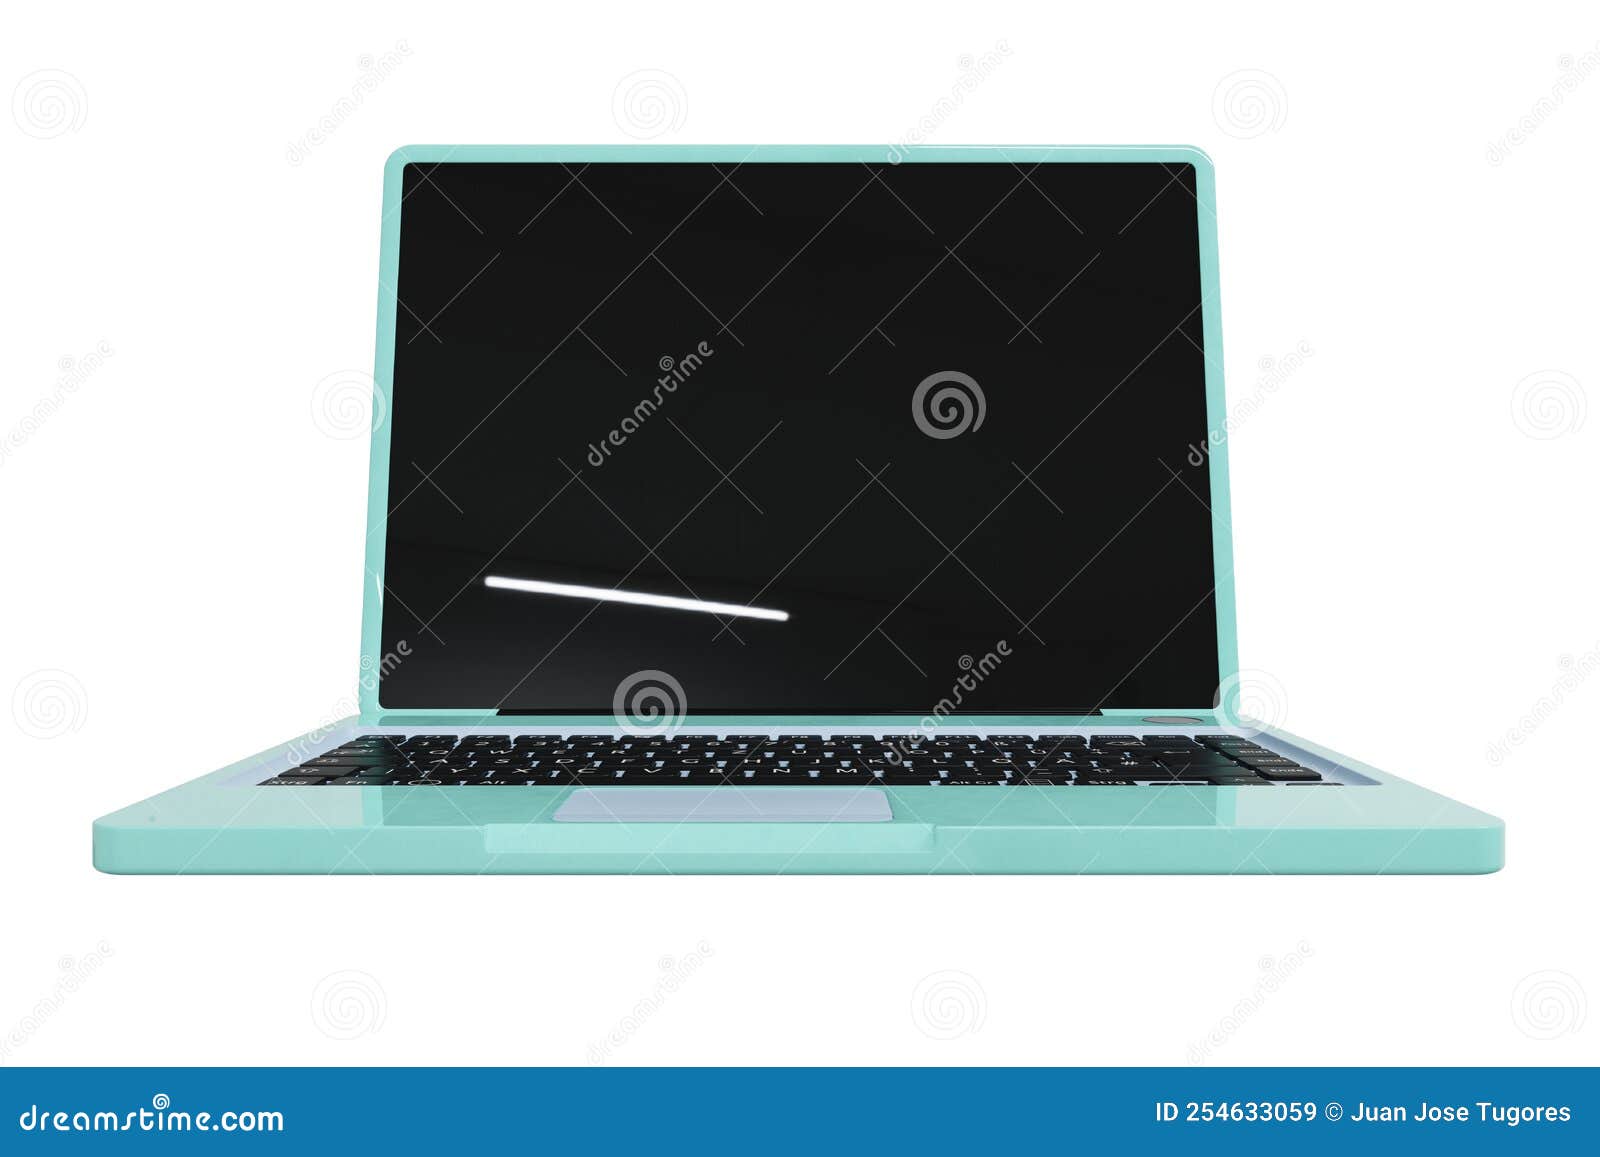 laptop with a smooth background, without reflections